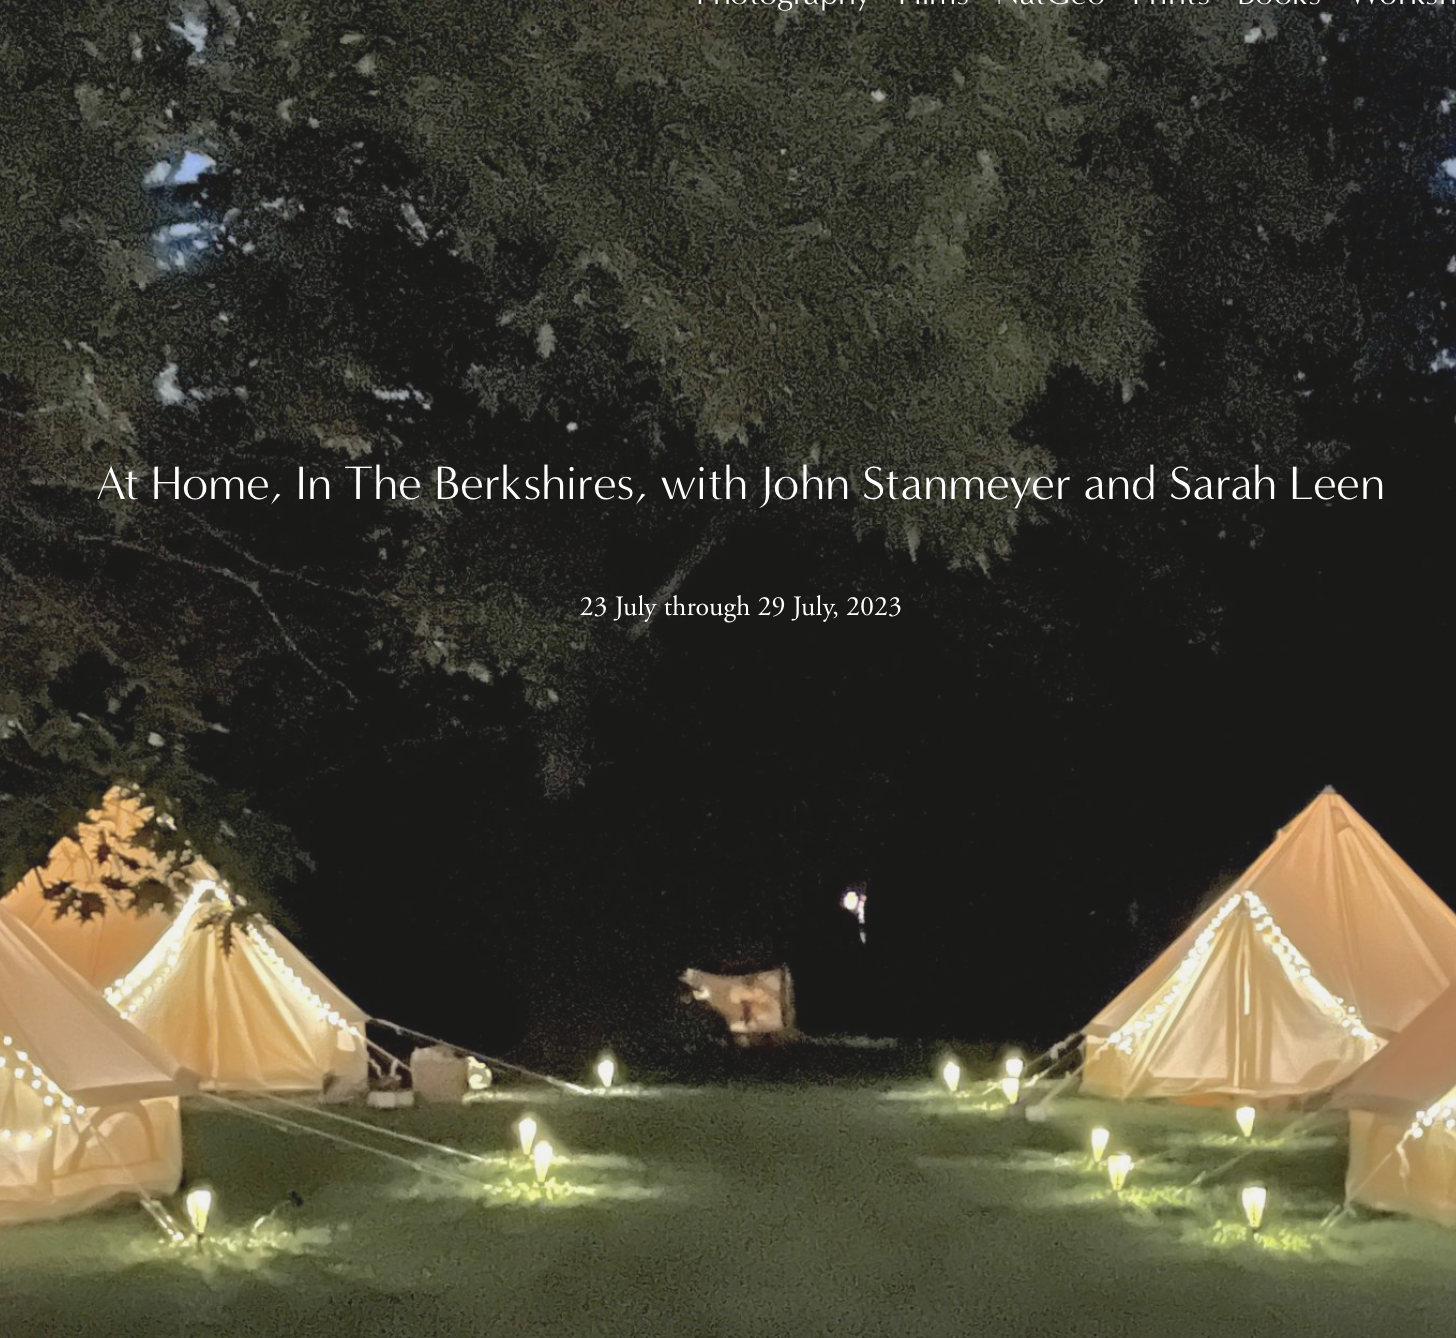 Thumbnail of At Home in the Berkshires with John Stanmeyer and Sarah Leen 